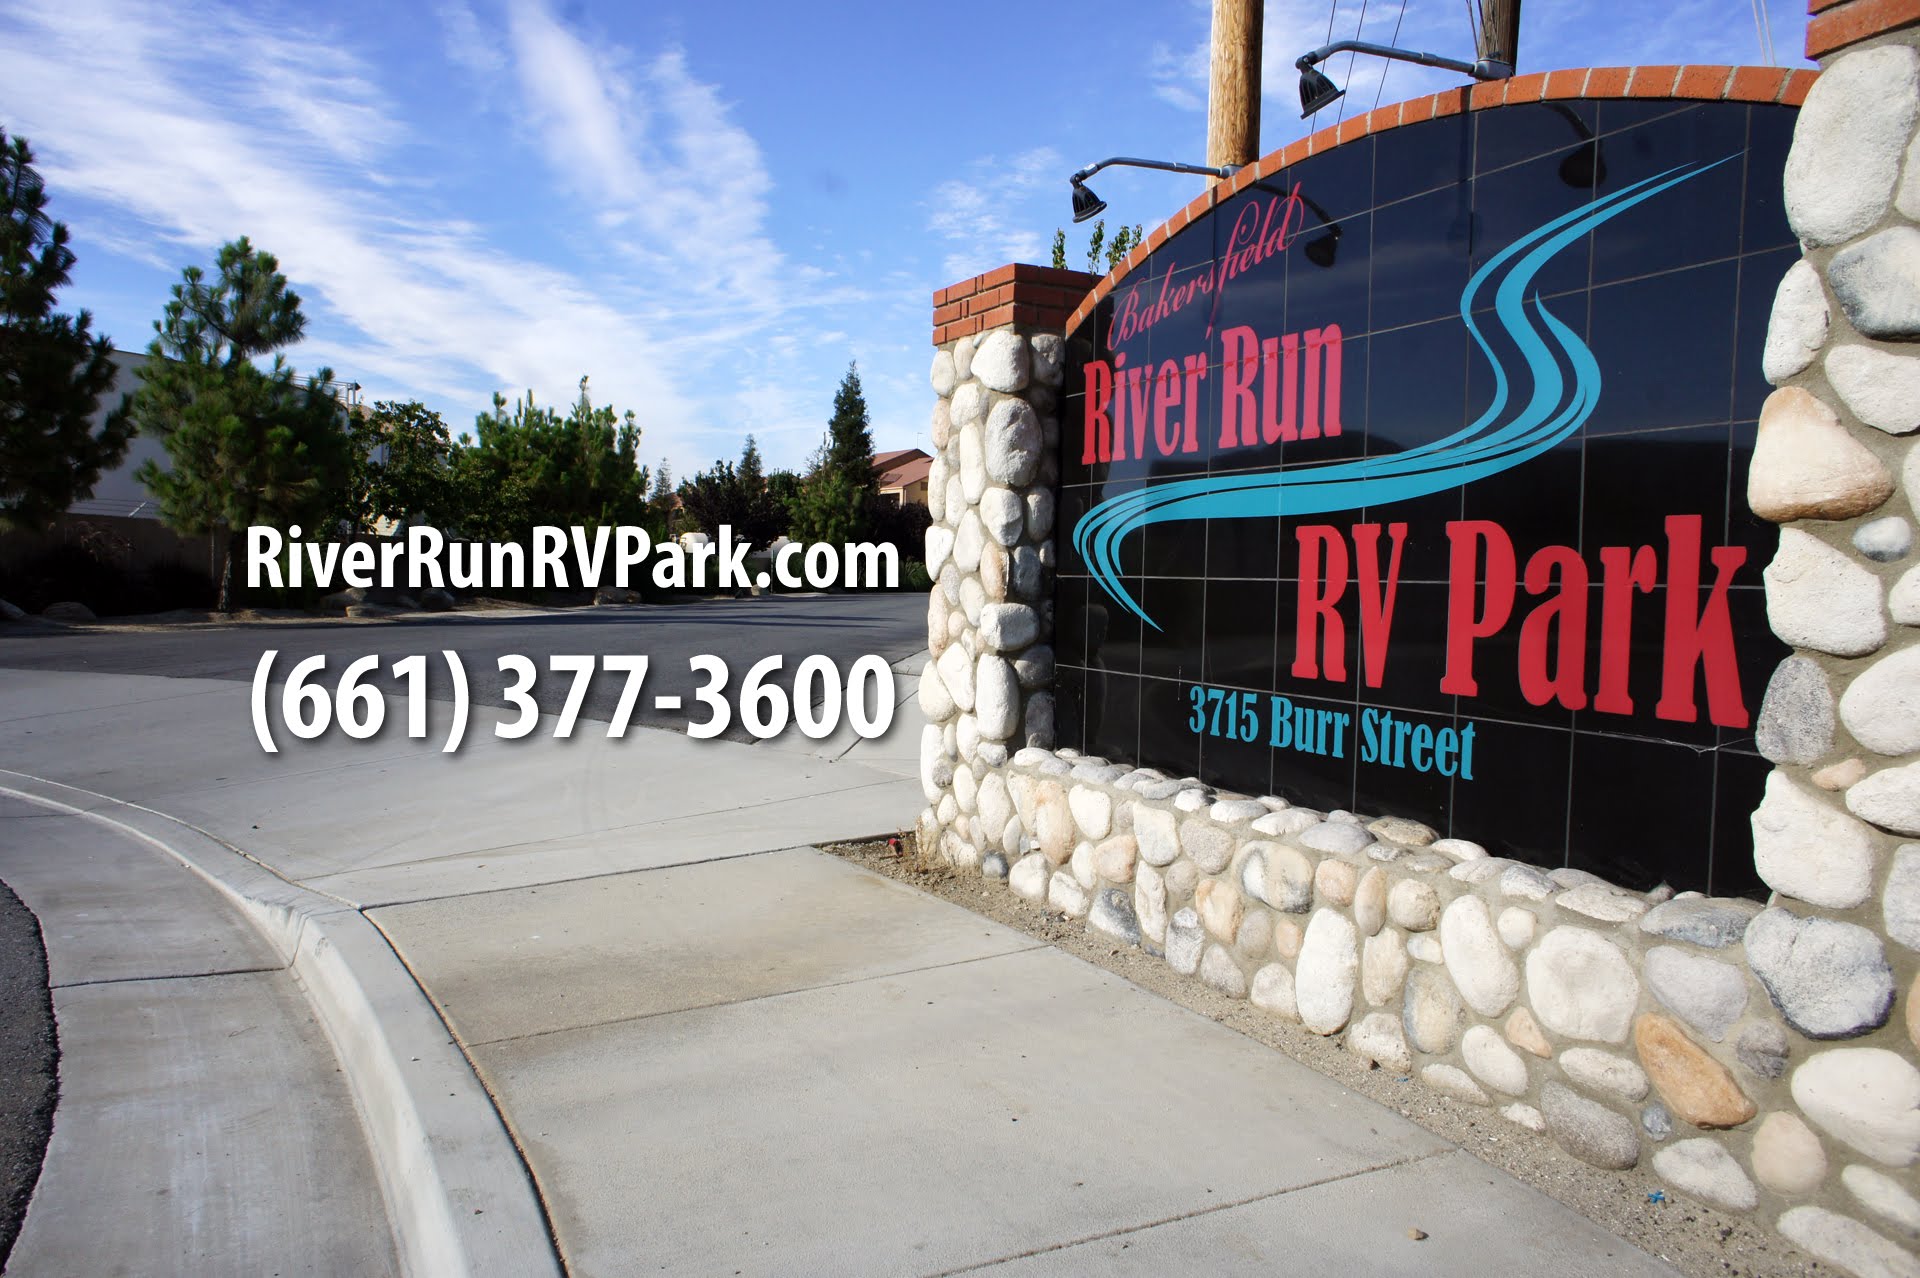 River Run RV Park - sign and entrance